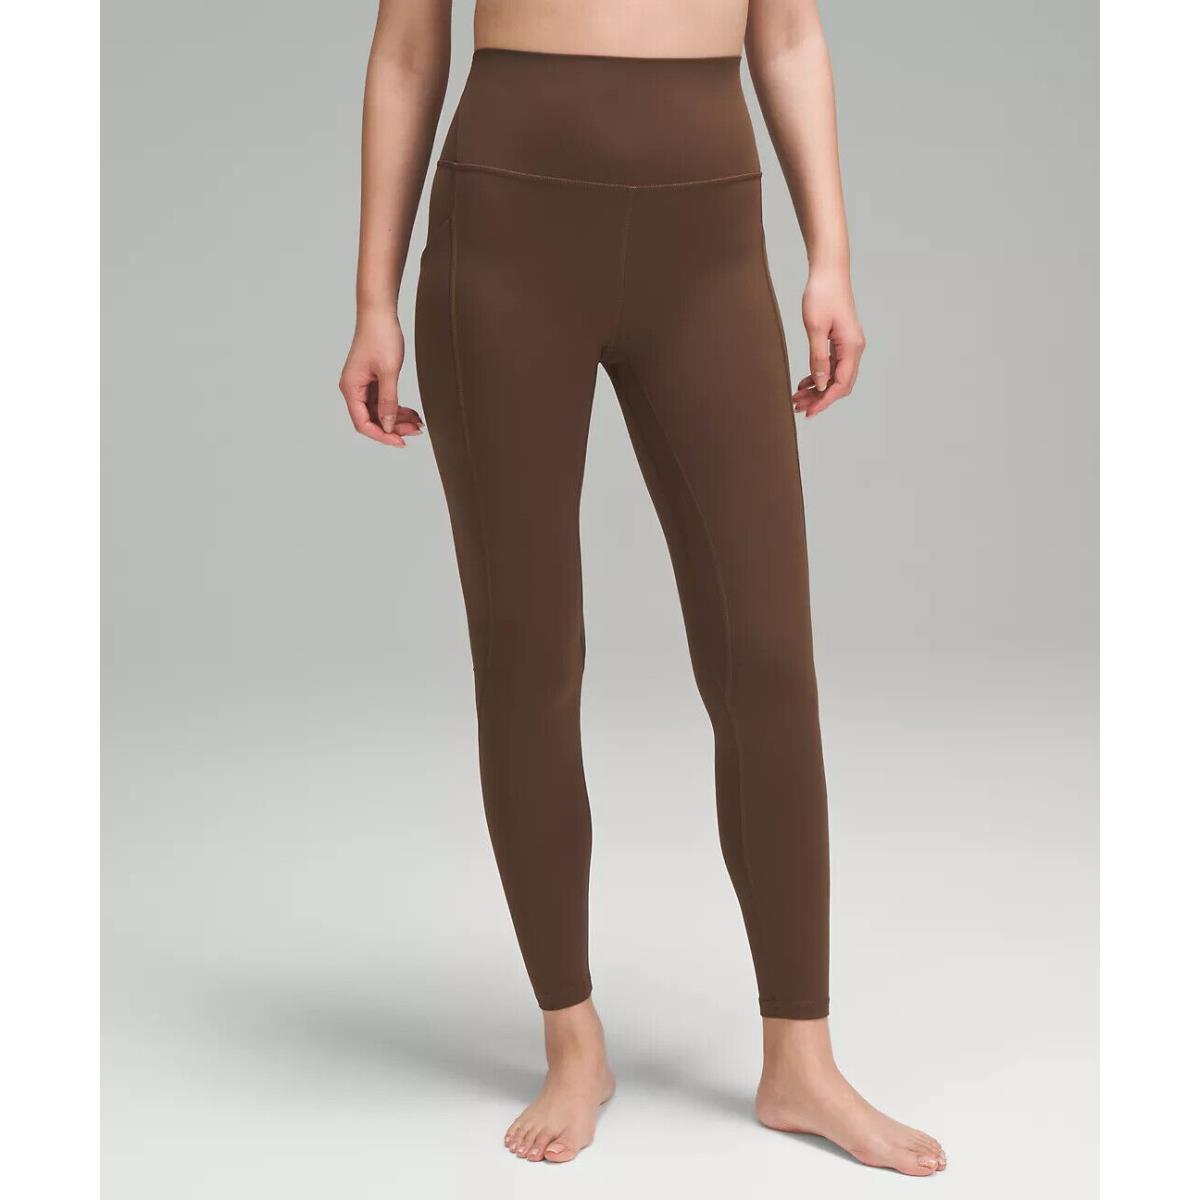 Lululemon Align HR Pant 25 with Pockets - Retail